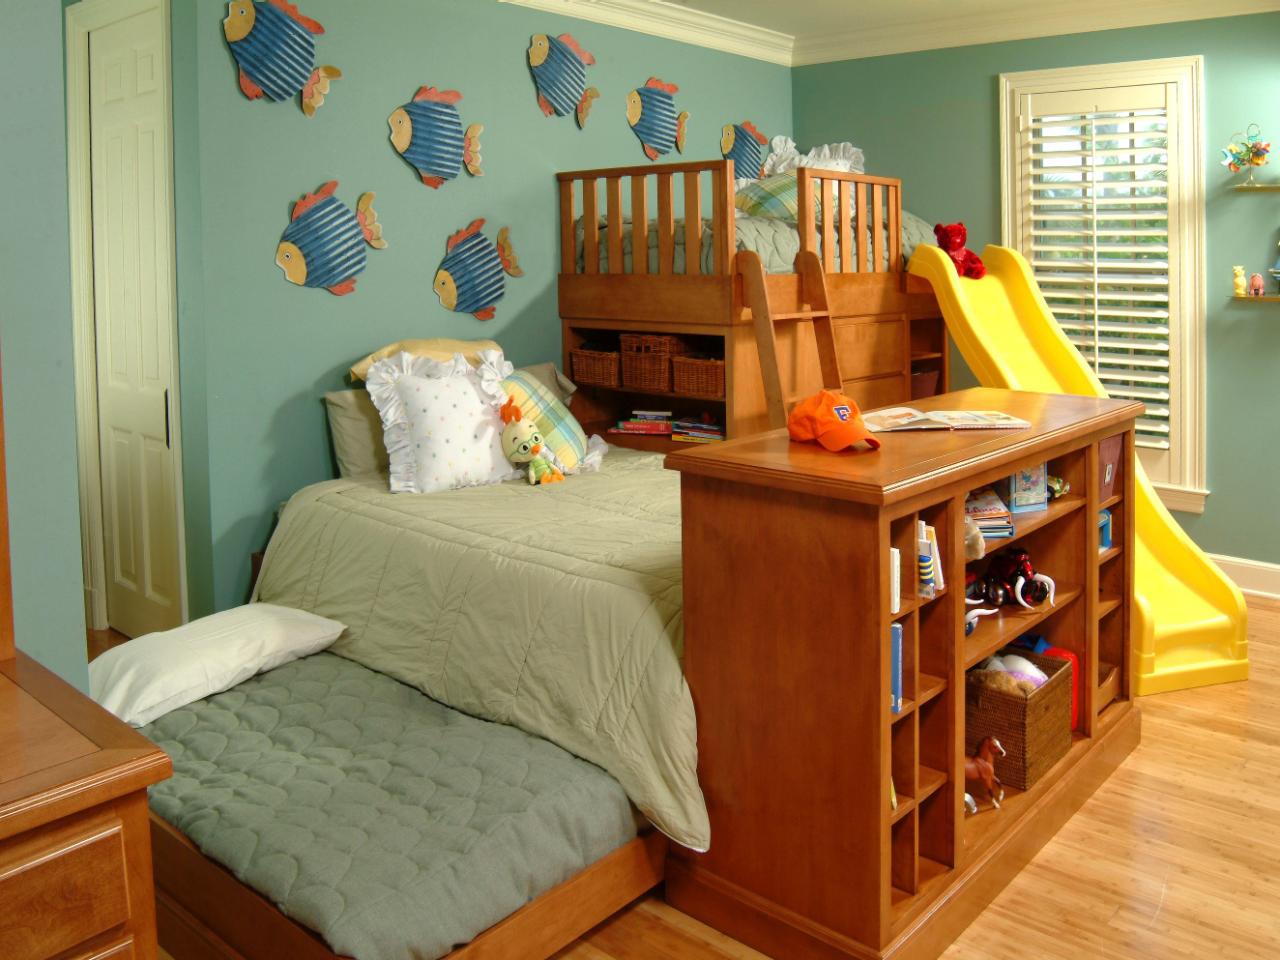 Kids Bedroom Wall Excellent Kids Bedroom With Ocean Wall Design Furnished With Bunk Bed In Wooden Platform And Completed With Kids Room Storage Of Cupboard Kids Room The Two Ideas For Making The Kids Room Storage